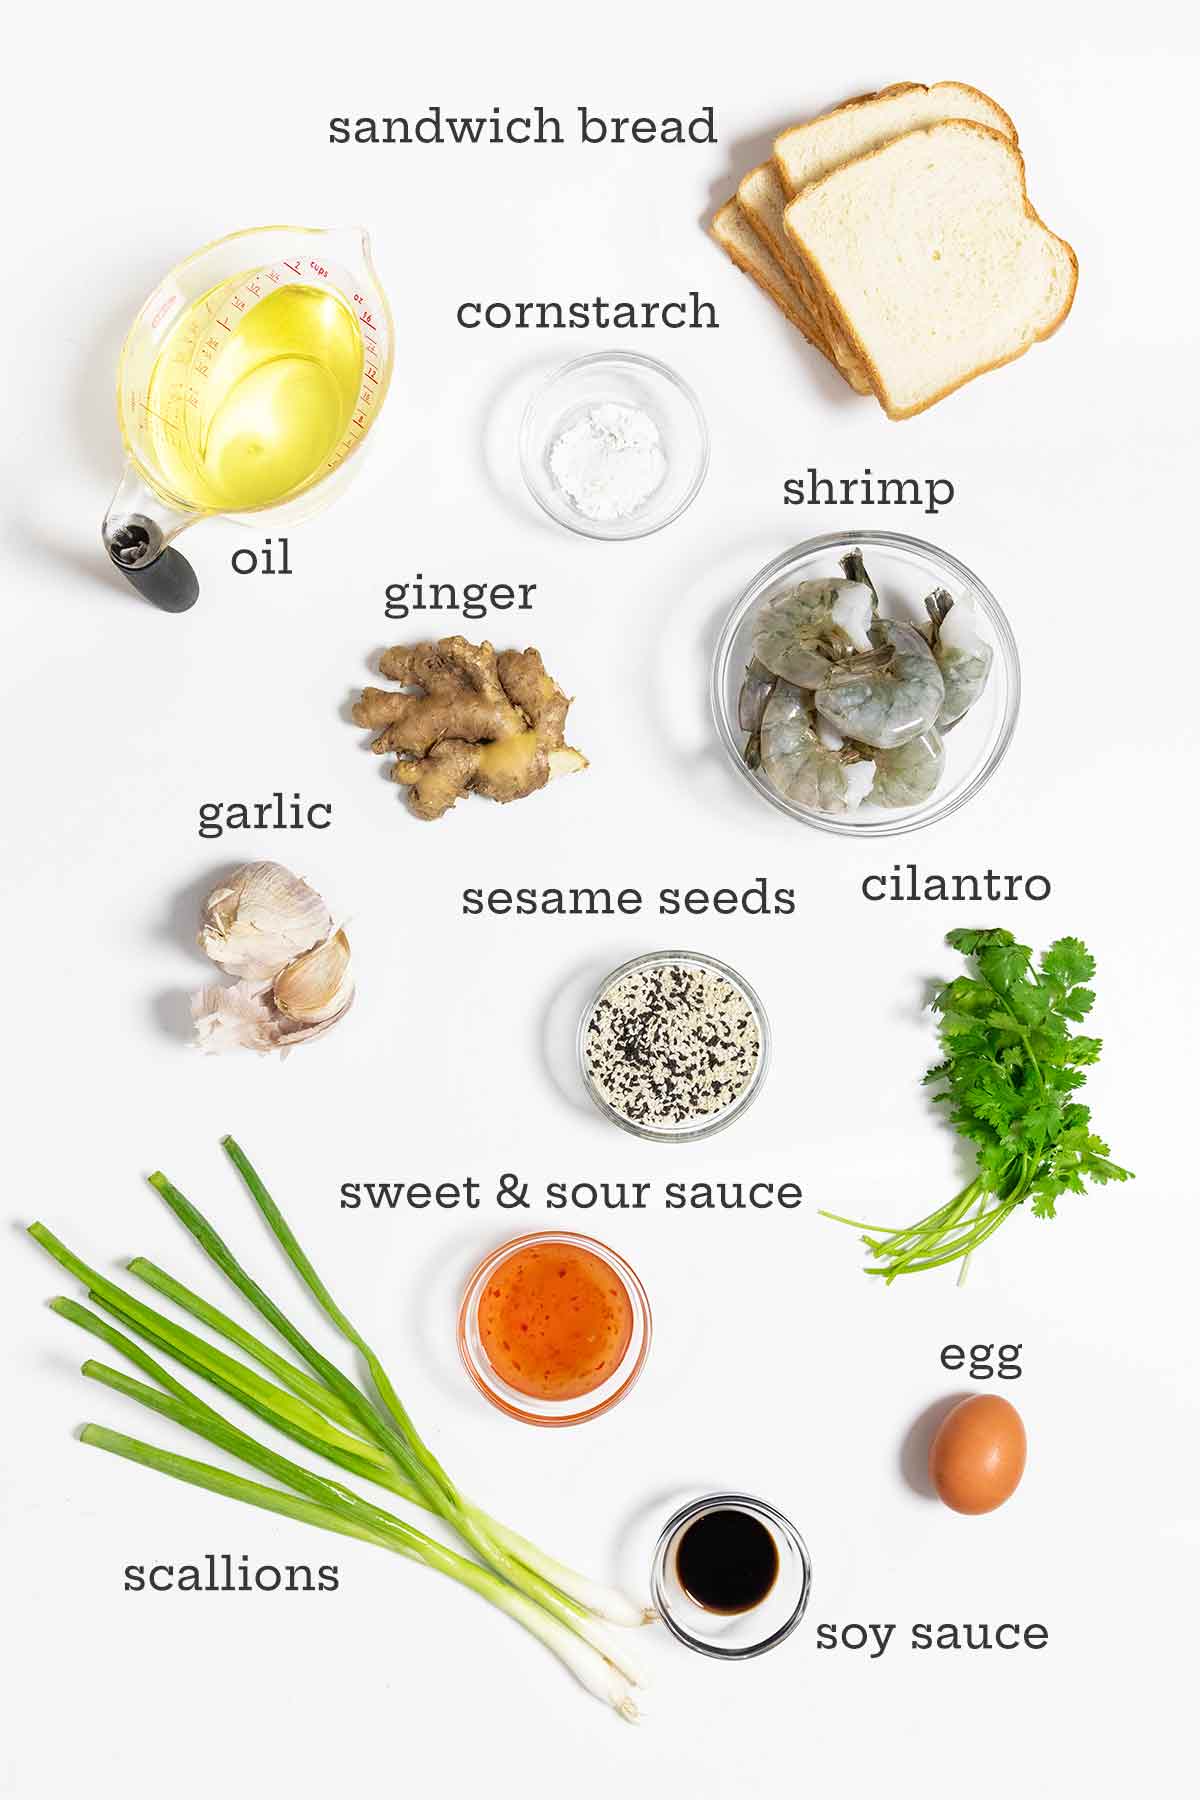 Ingredients for shrimp toast--bread, oil, cornstarch, shrimp, ginger, garlic, sesame seeds, cilantro, scallions, egg, soy sauce, and sweet and sour sauce.